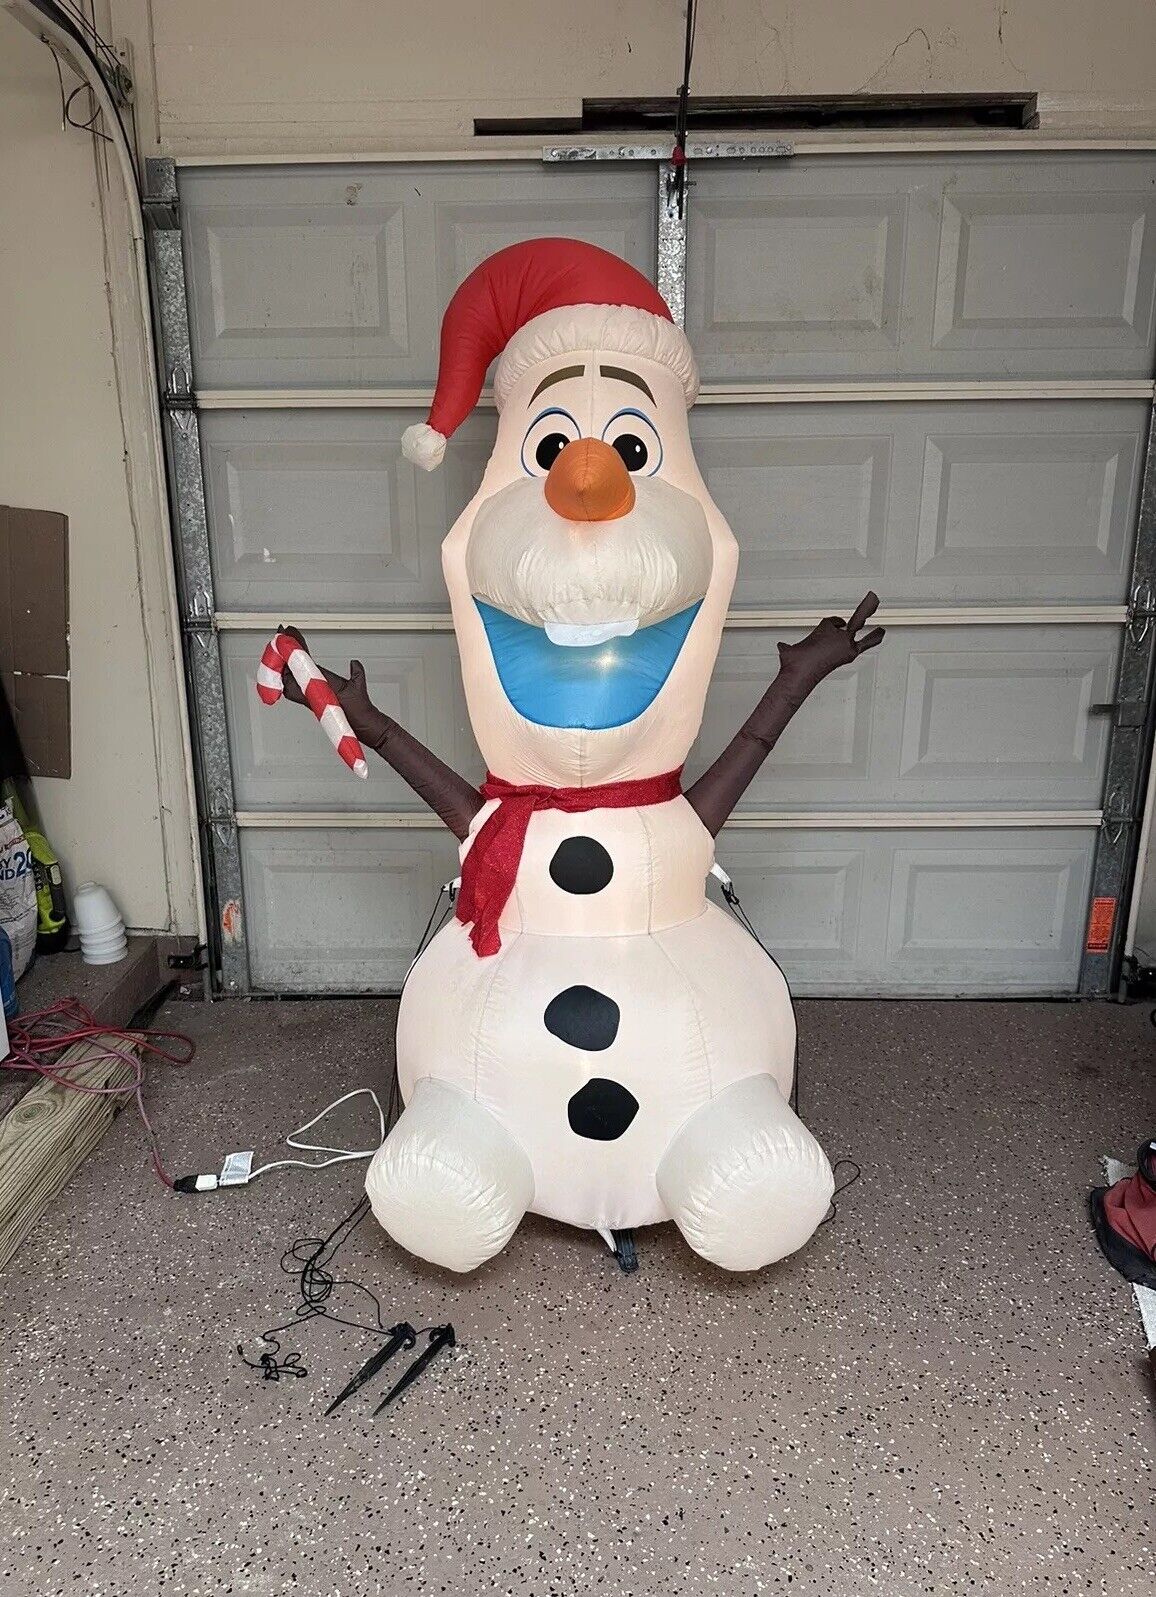 Gemmy Frozen 6-ft Lighted Frozen Olaf The Snowman Christmas Inflatable